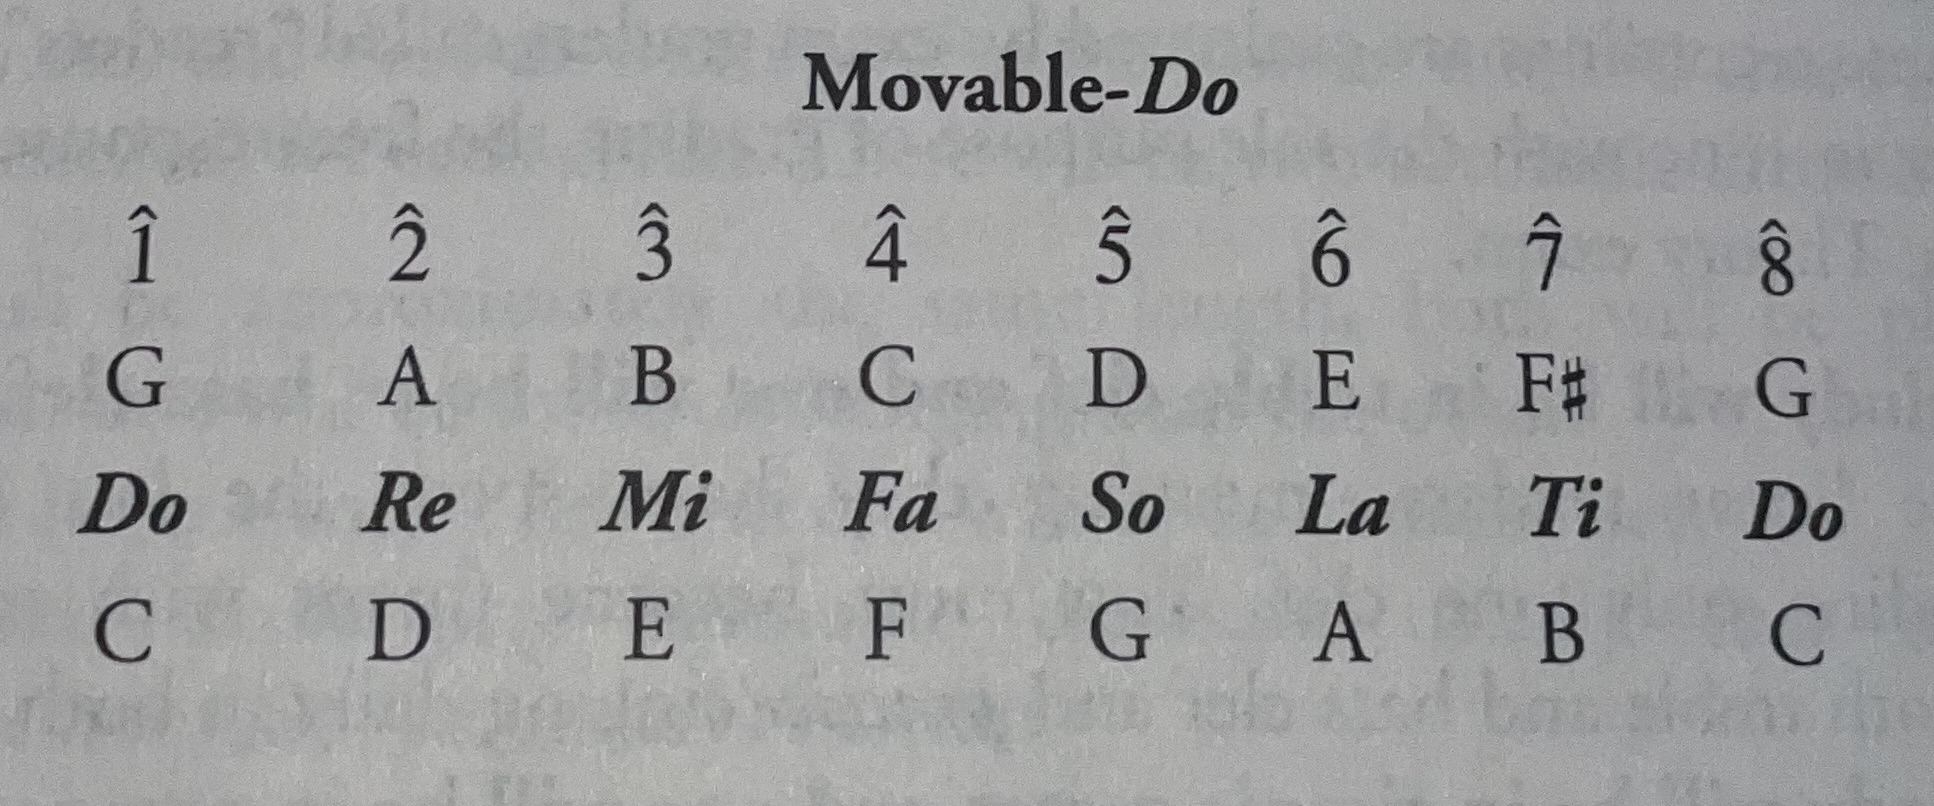 <p>Commonly used method of solfeggio. It means that regardless of what key you’re in, the tonic (first note of the scale) is always Do.</p>